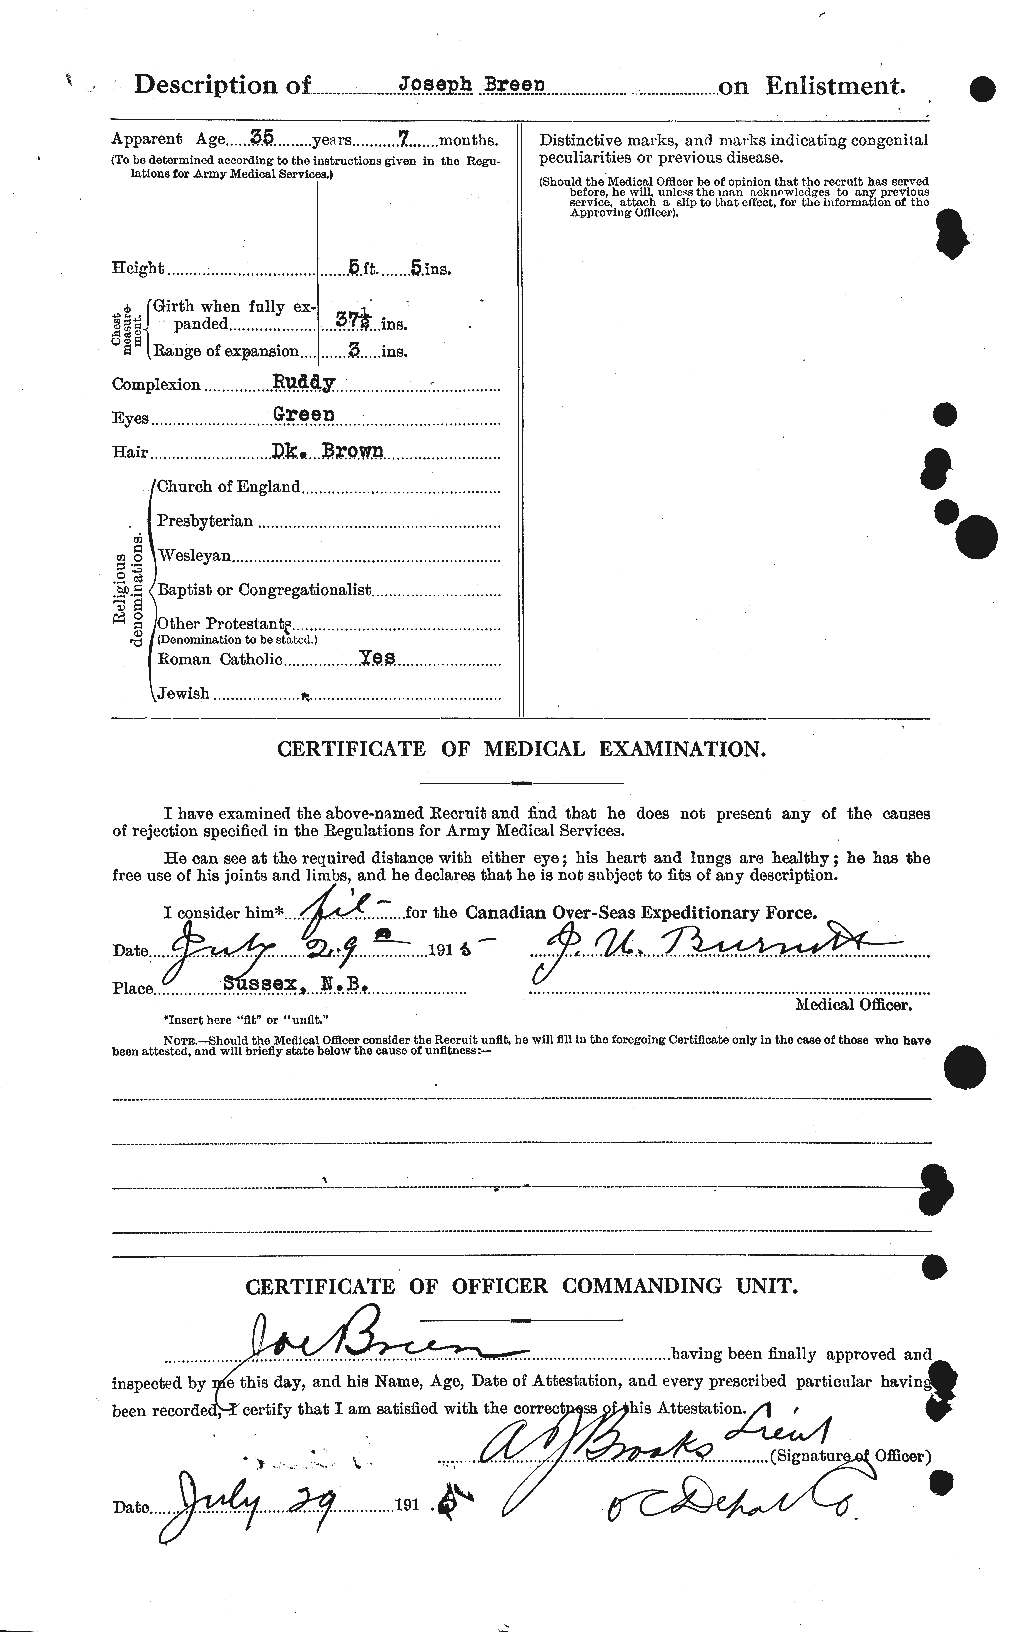 Personnel Records of the First World War - CEF 263541b